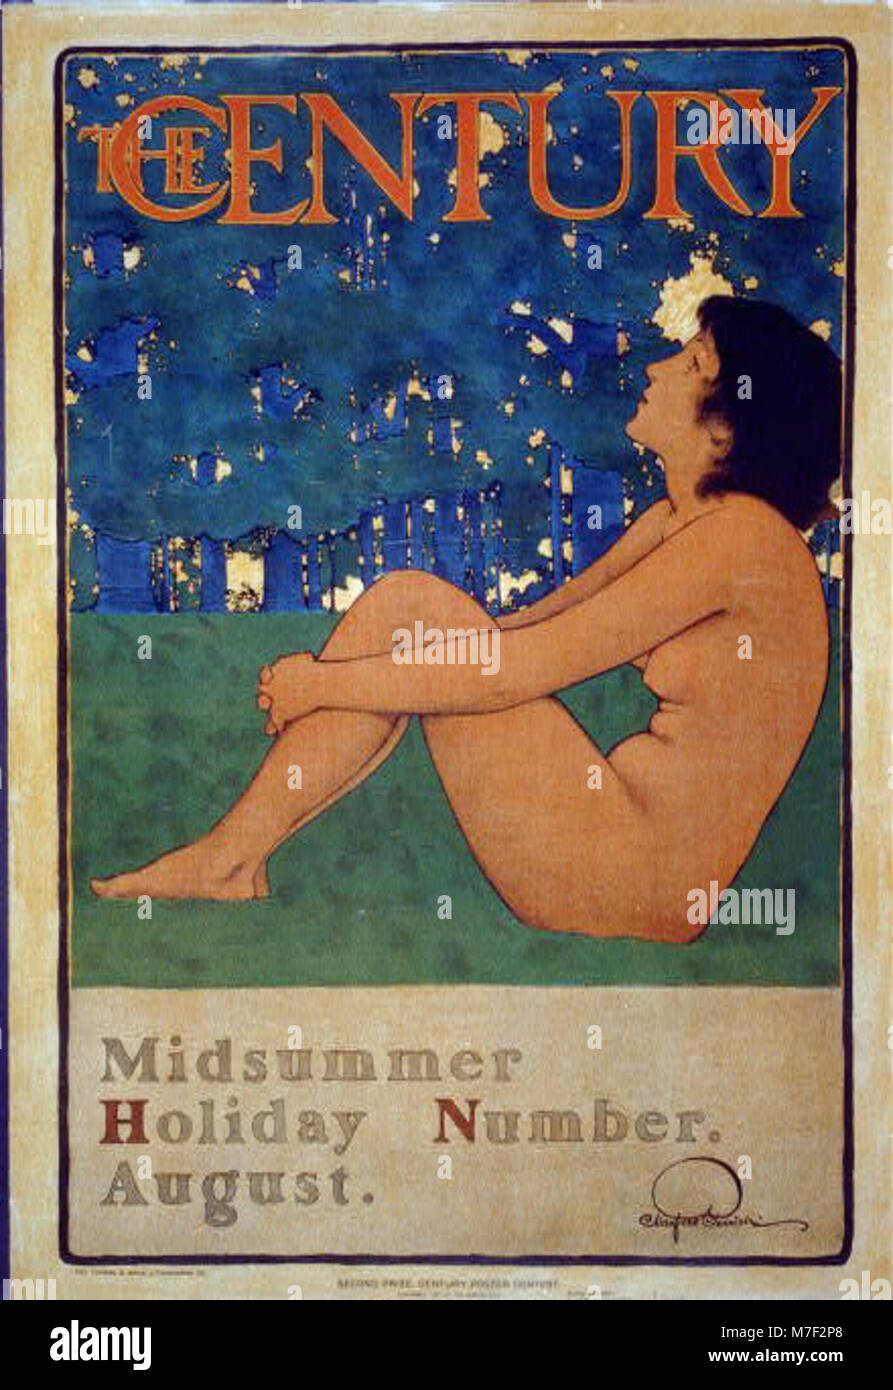 The Century - Midsummer holiday number - August - Maxfield Parrish LCCN2002719203 Stock Photo